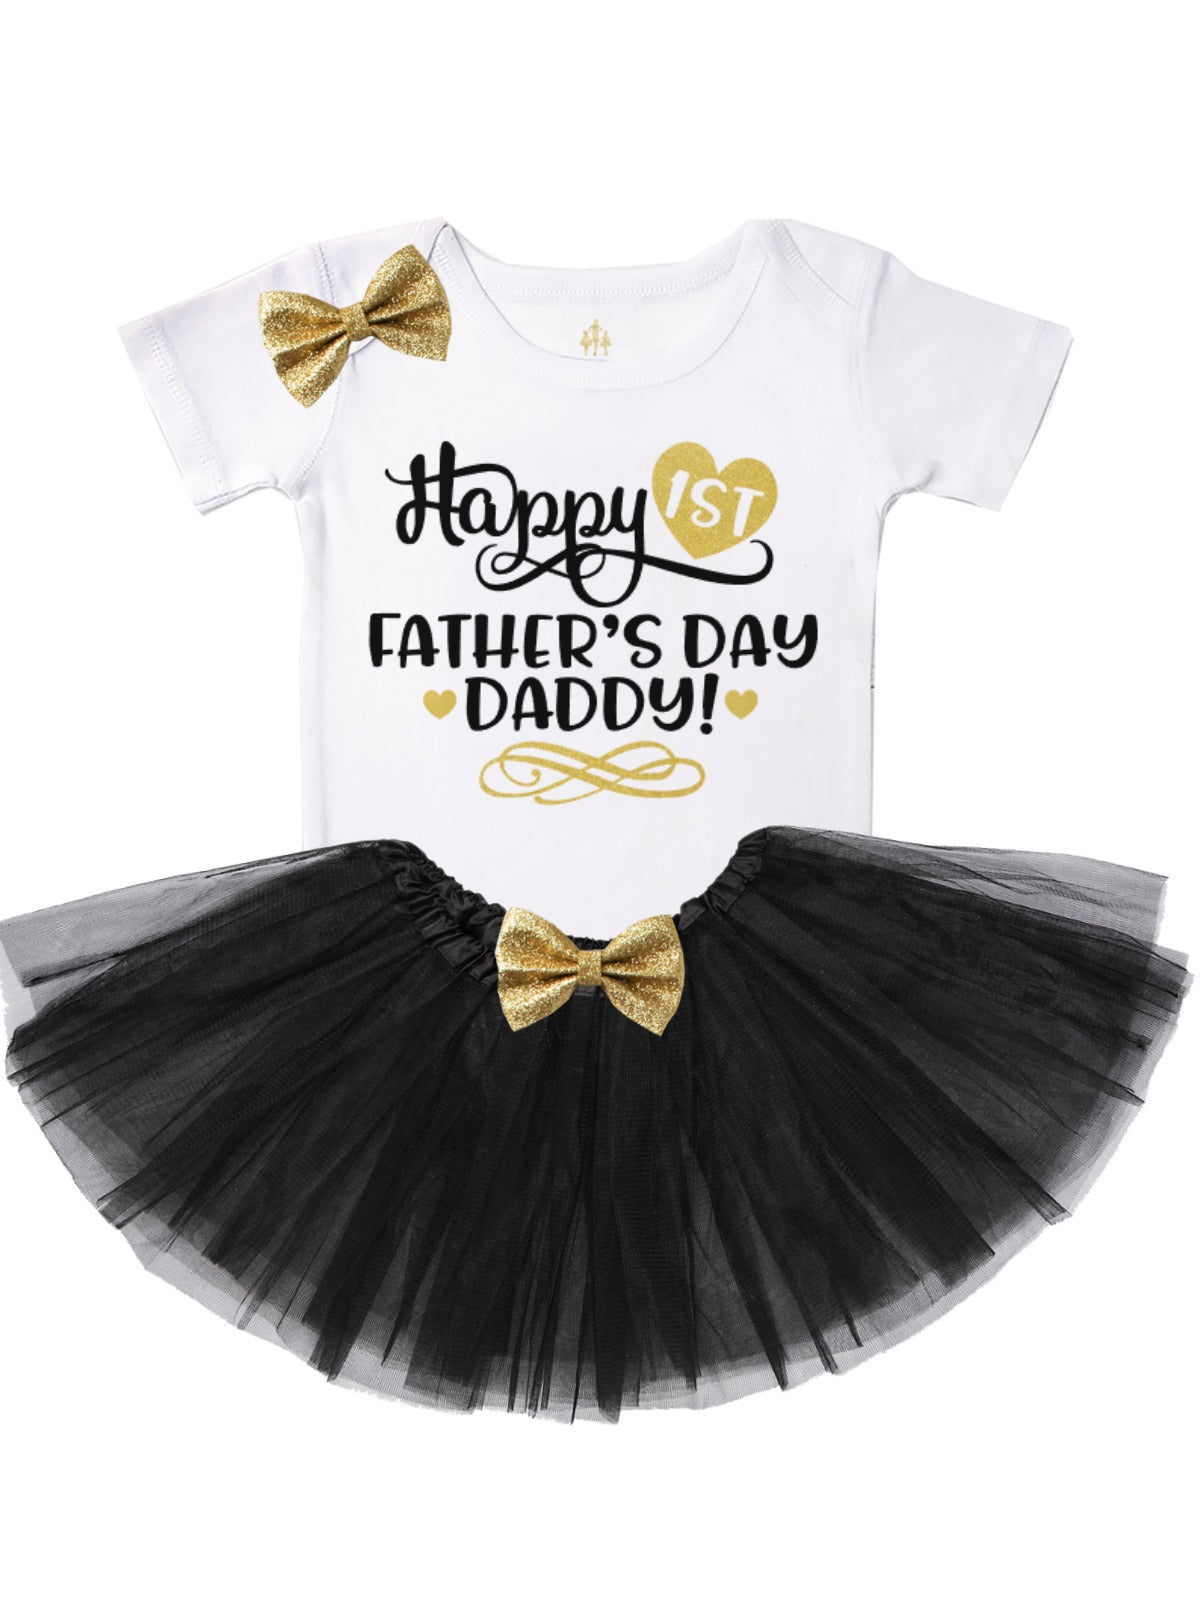 Happy 1st Father's Day Daddy Tutu Outfit in Black and Gold